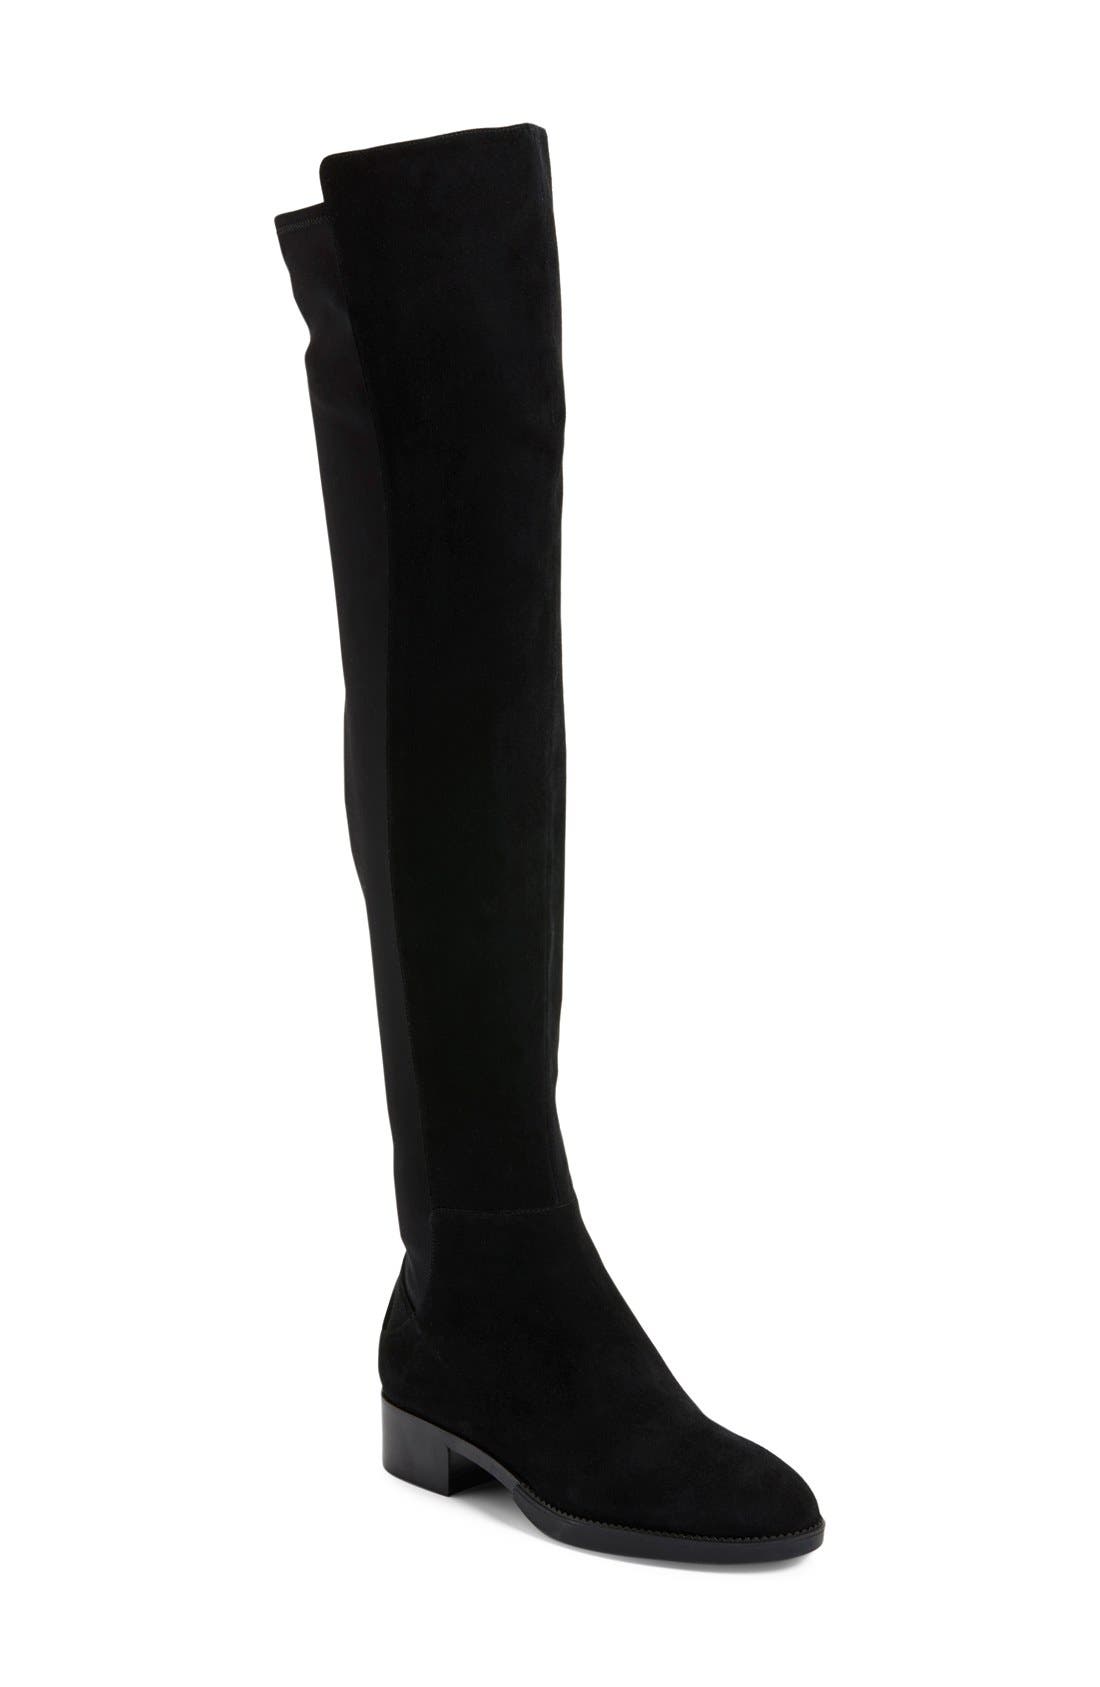 tory burch caitlin over the knee boots